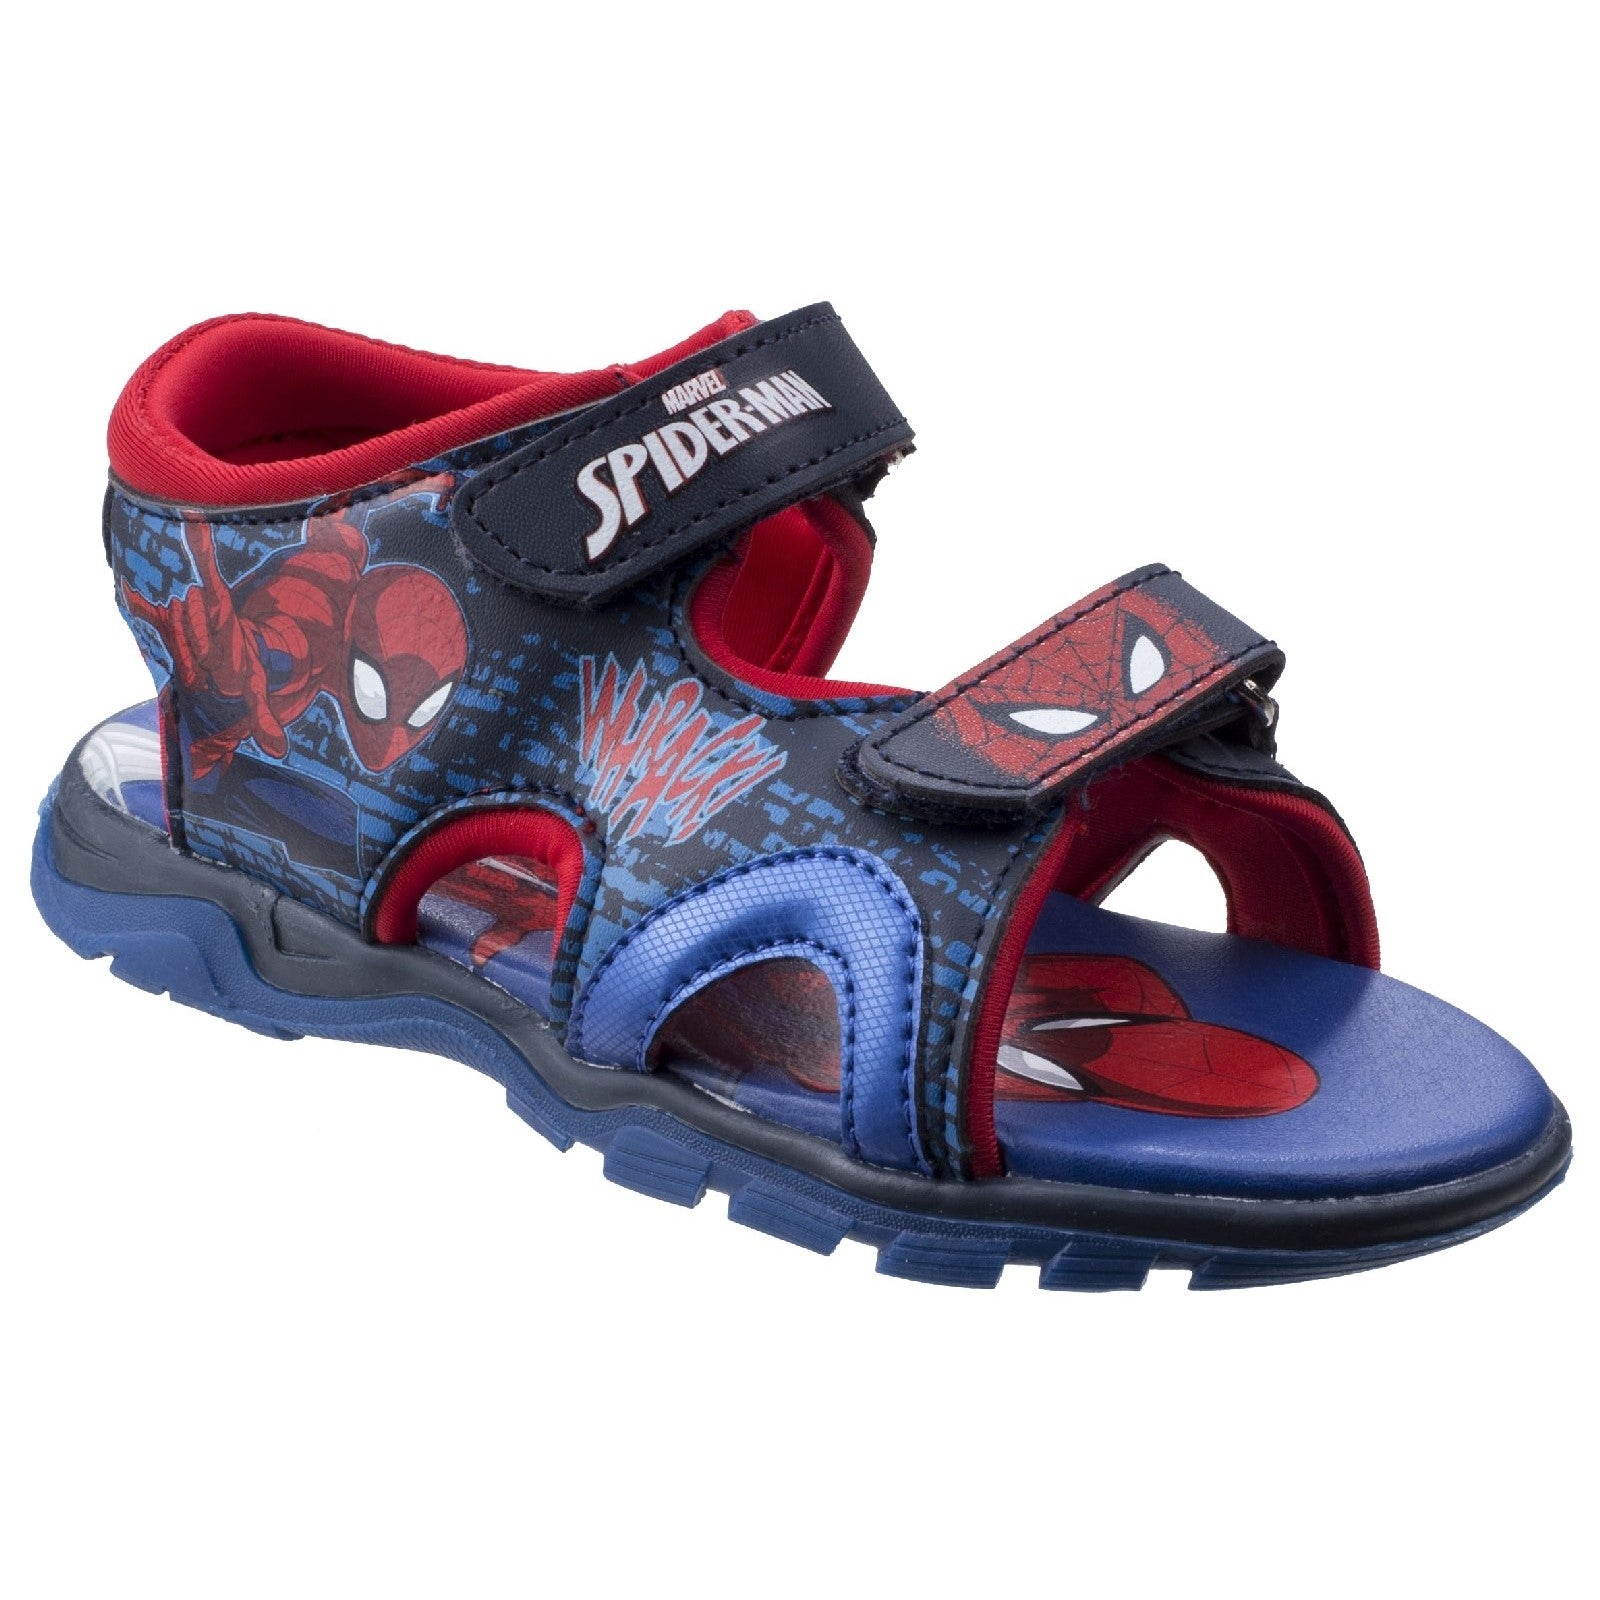 Leomil Spiderman Touch Fastening Sandal